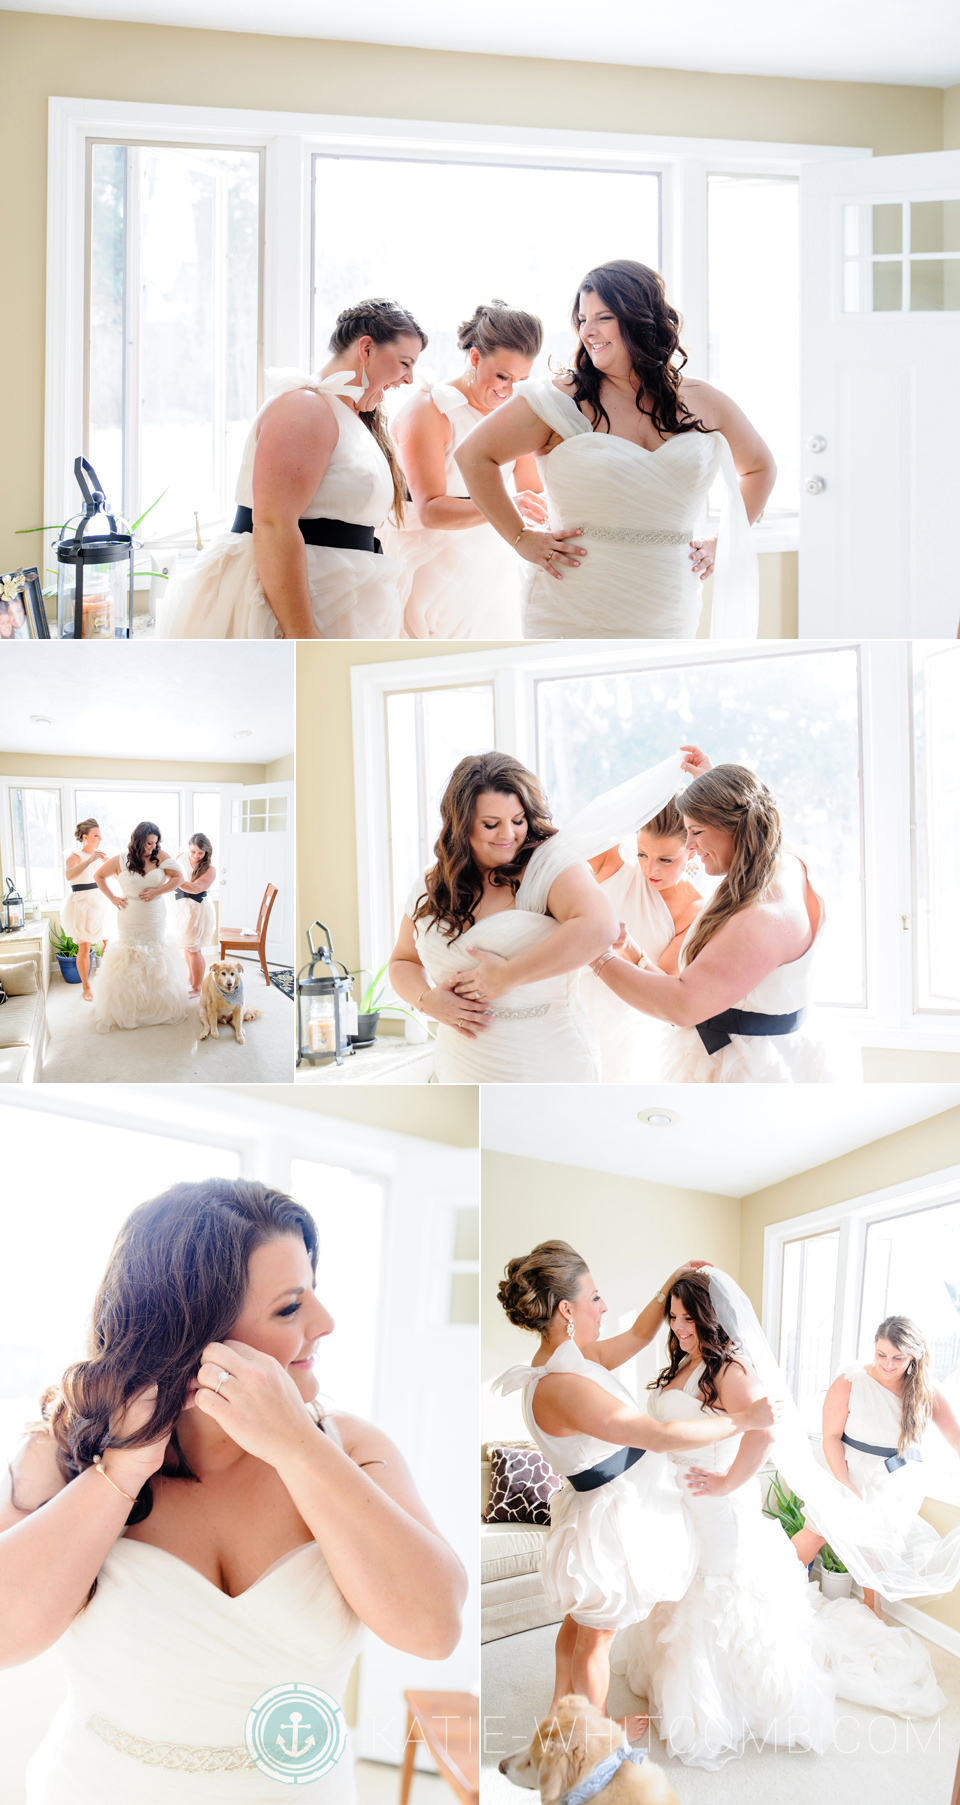 vera wang dresses, bride's sisters helping her get ready for her wedding ceremony